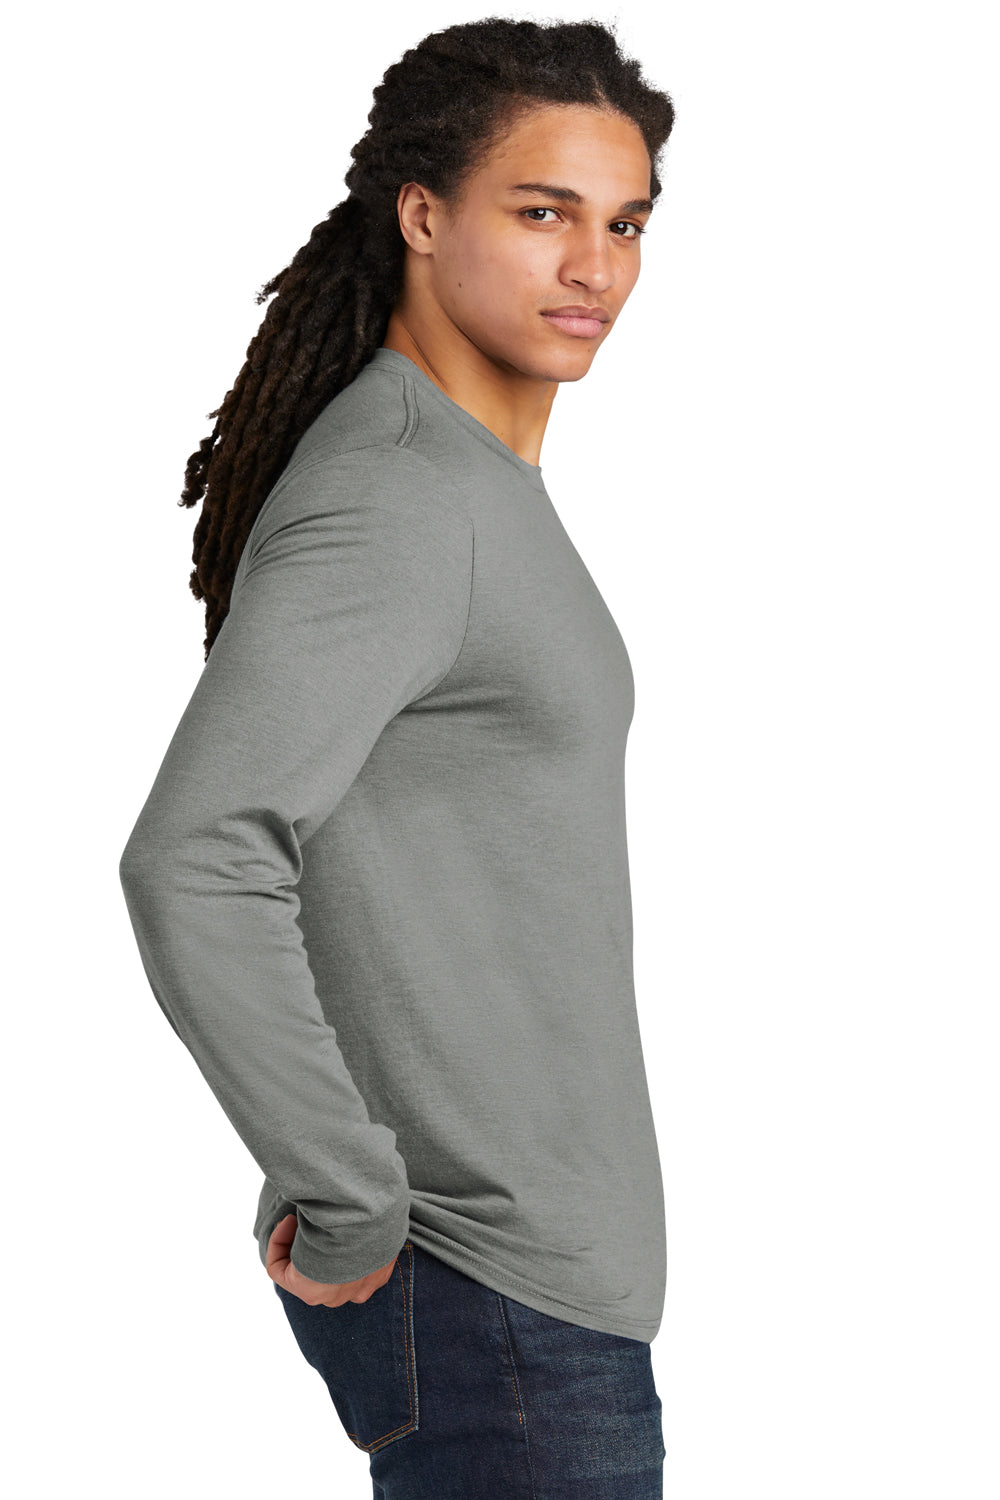 District Mens Perfect Tri Long Sleeve Crewneck T-Shirt Heather Charcoal Grey Side